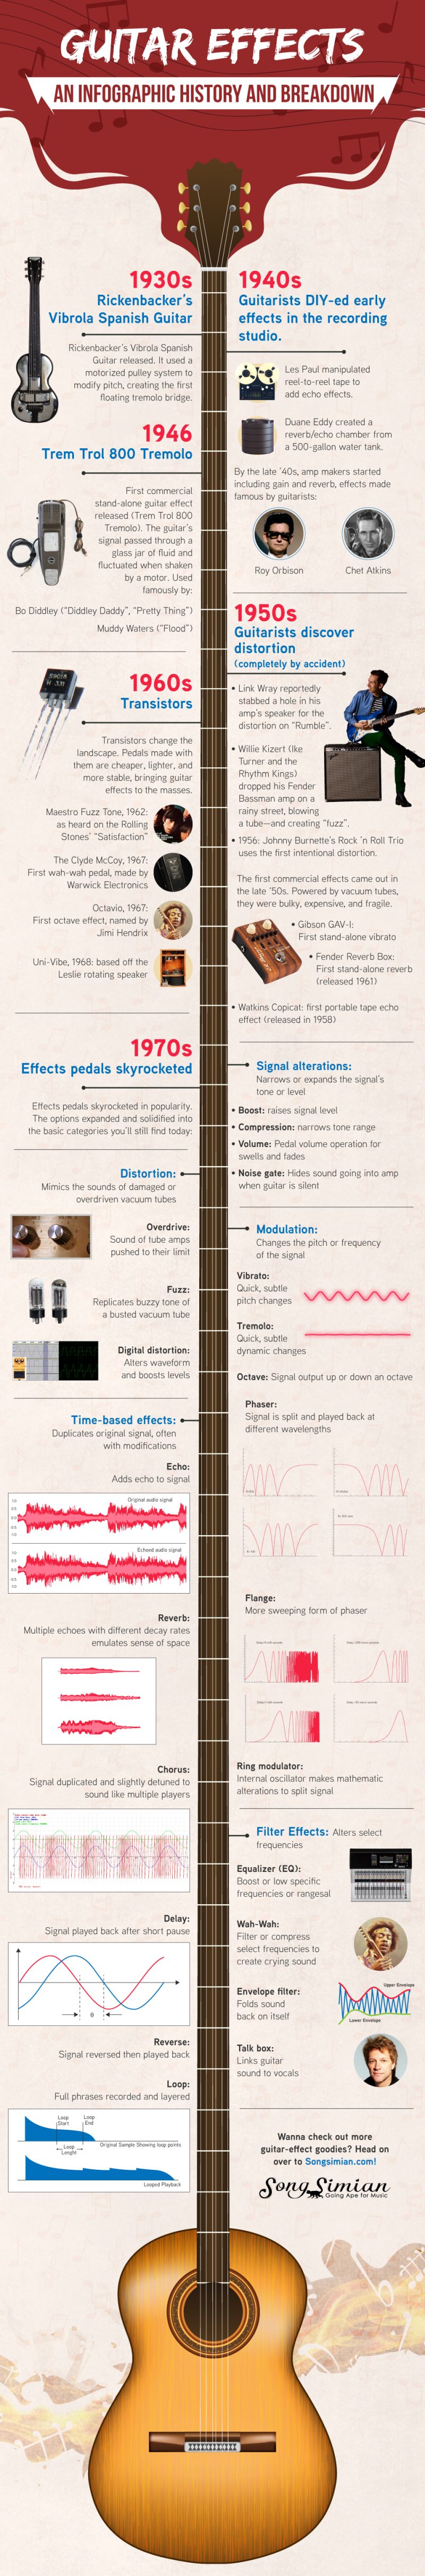 Guitar Effects: An Infographic History and Breakdown